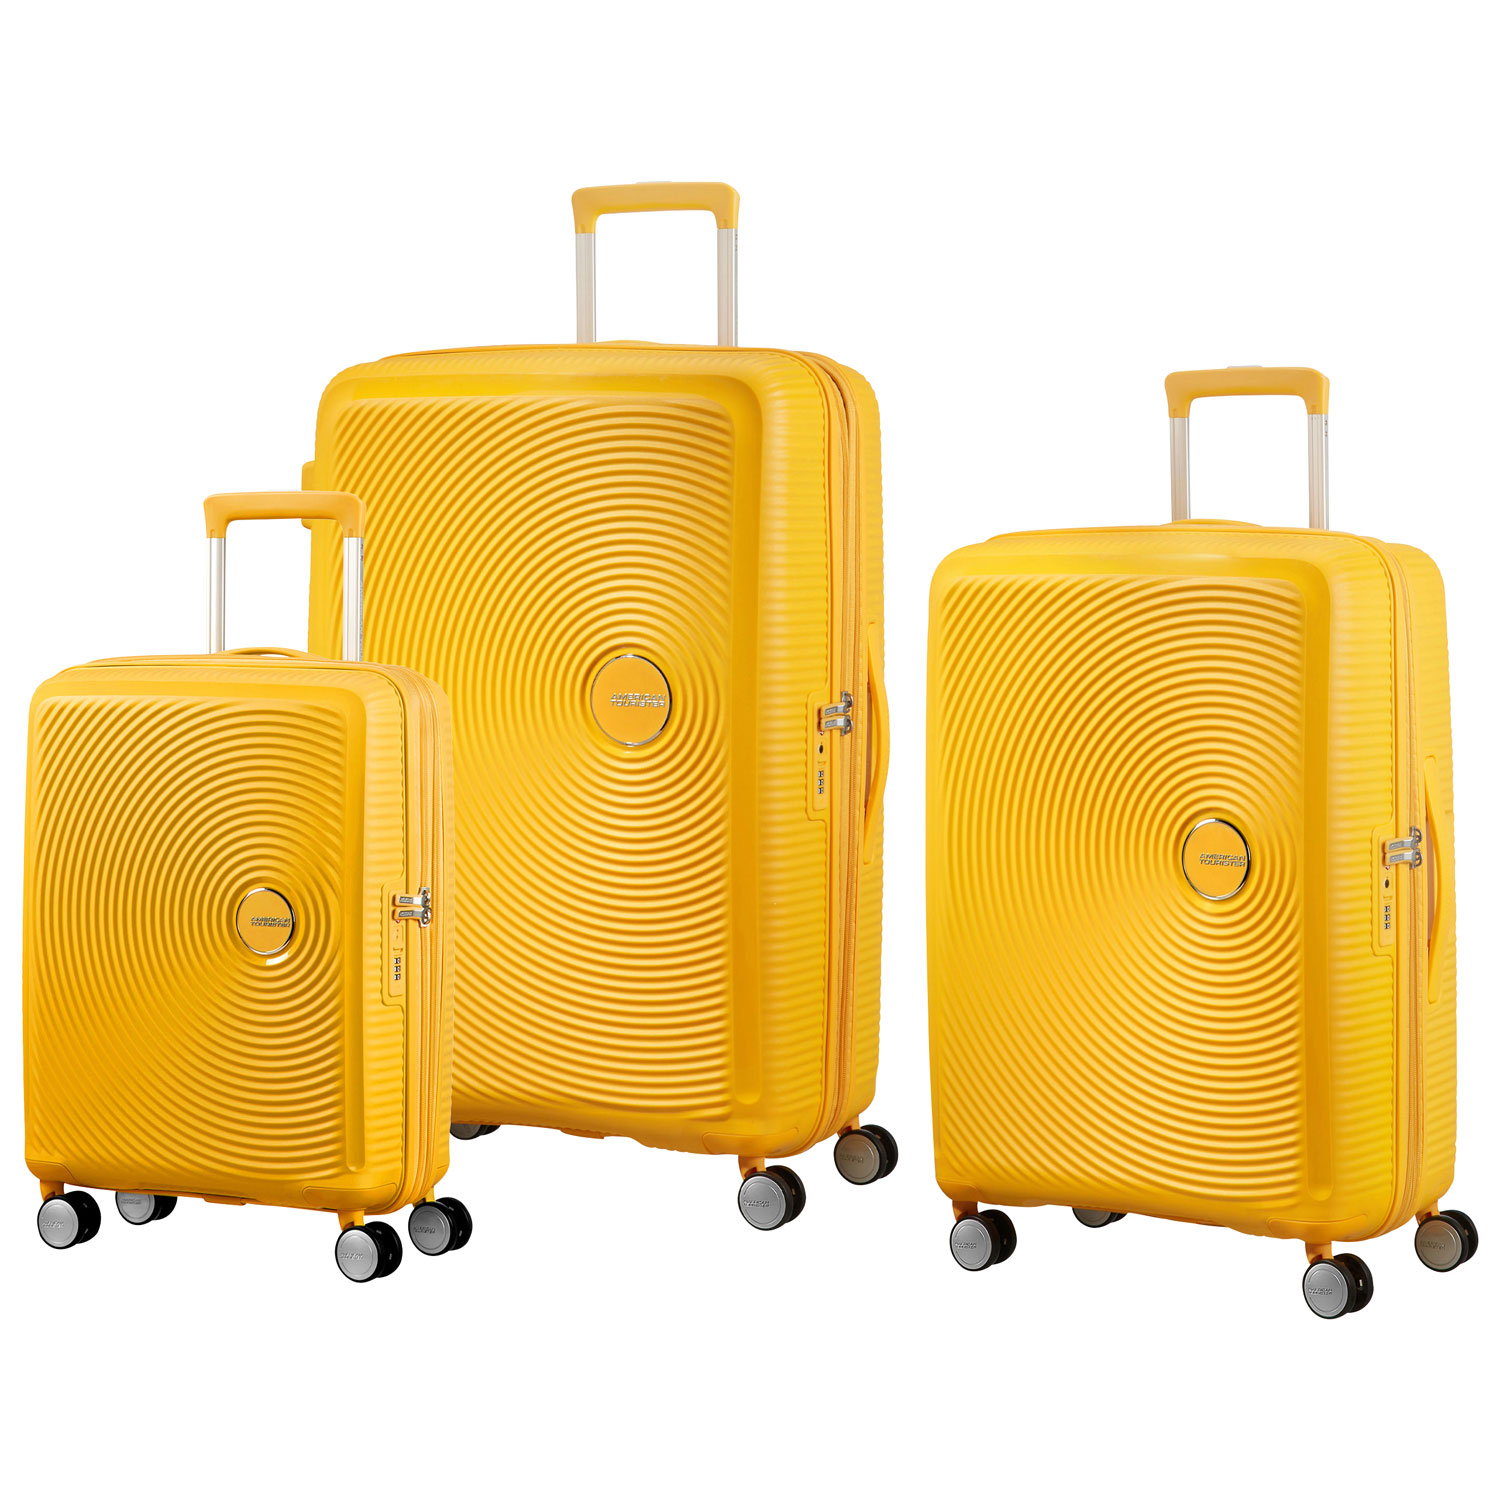 American Tourister Curio 3-Piece Hard Side Expandable Luggage Set - Golden Yellow